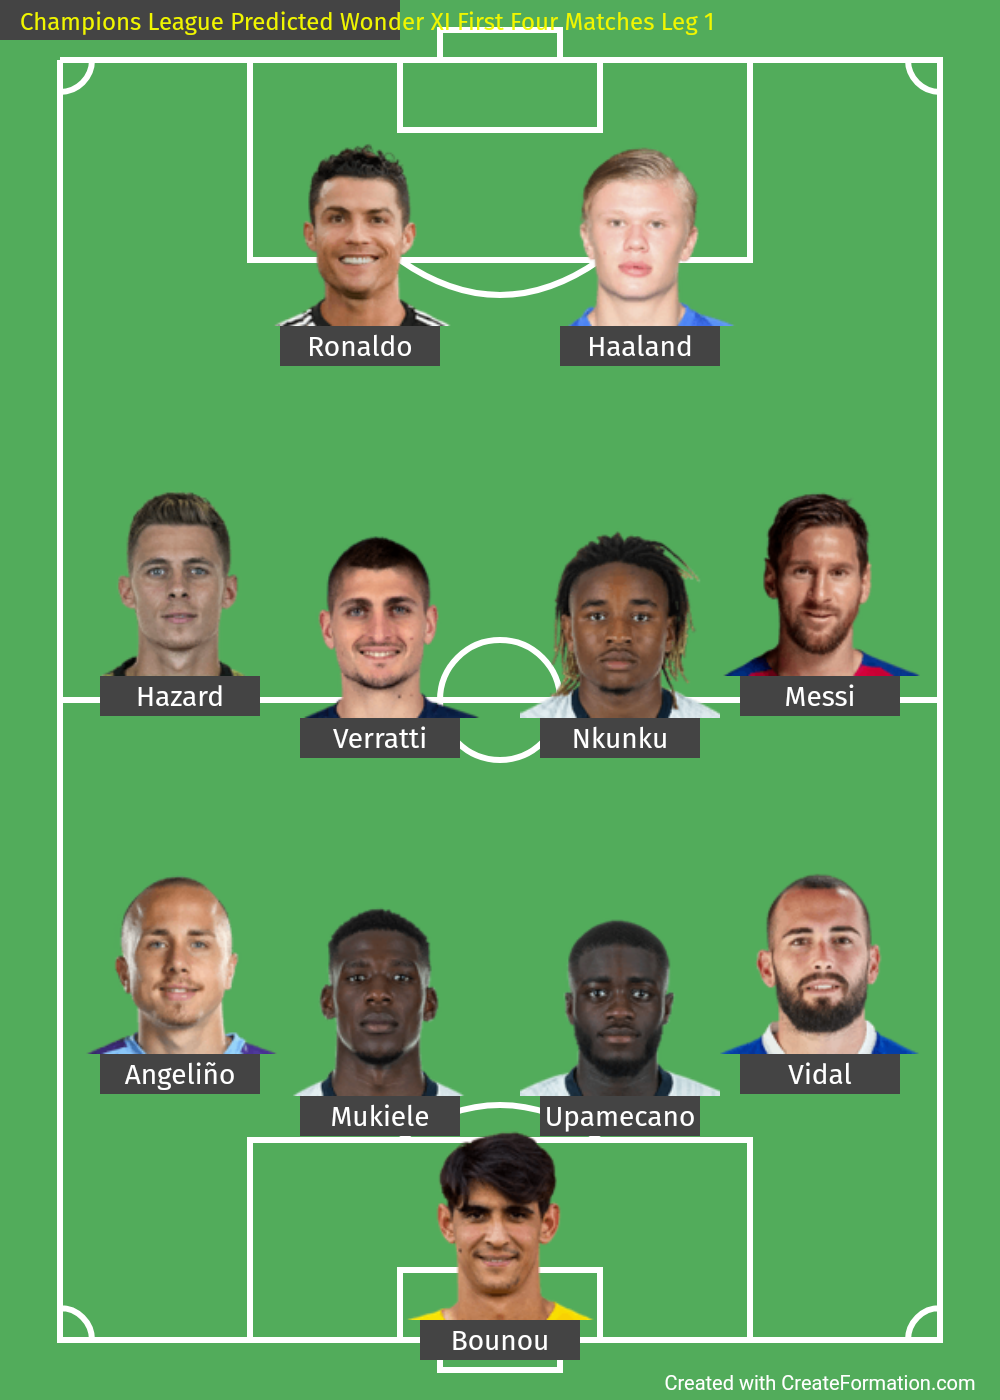 Champions League Predicted Wonder XI First Four Matches Leg 1.png